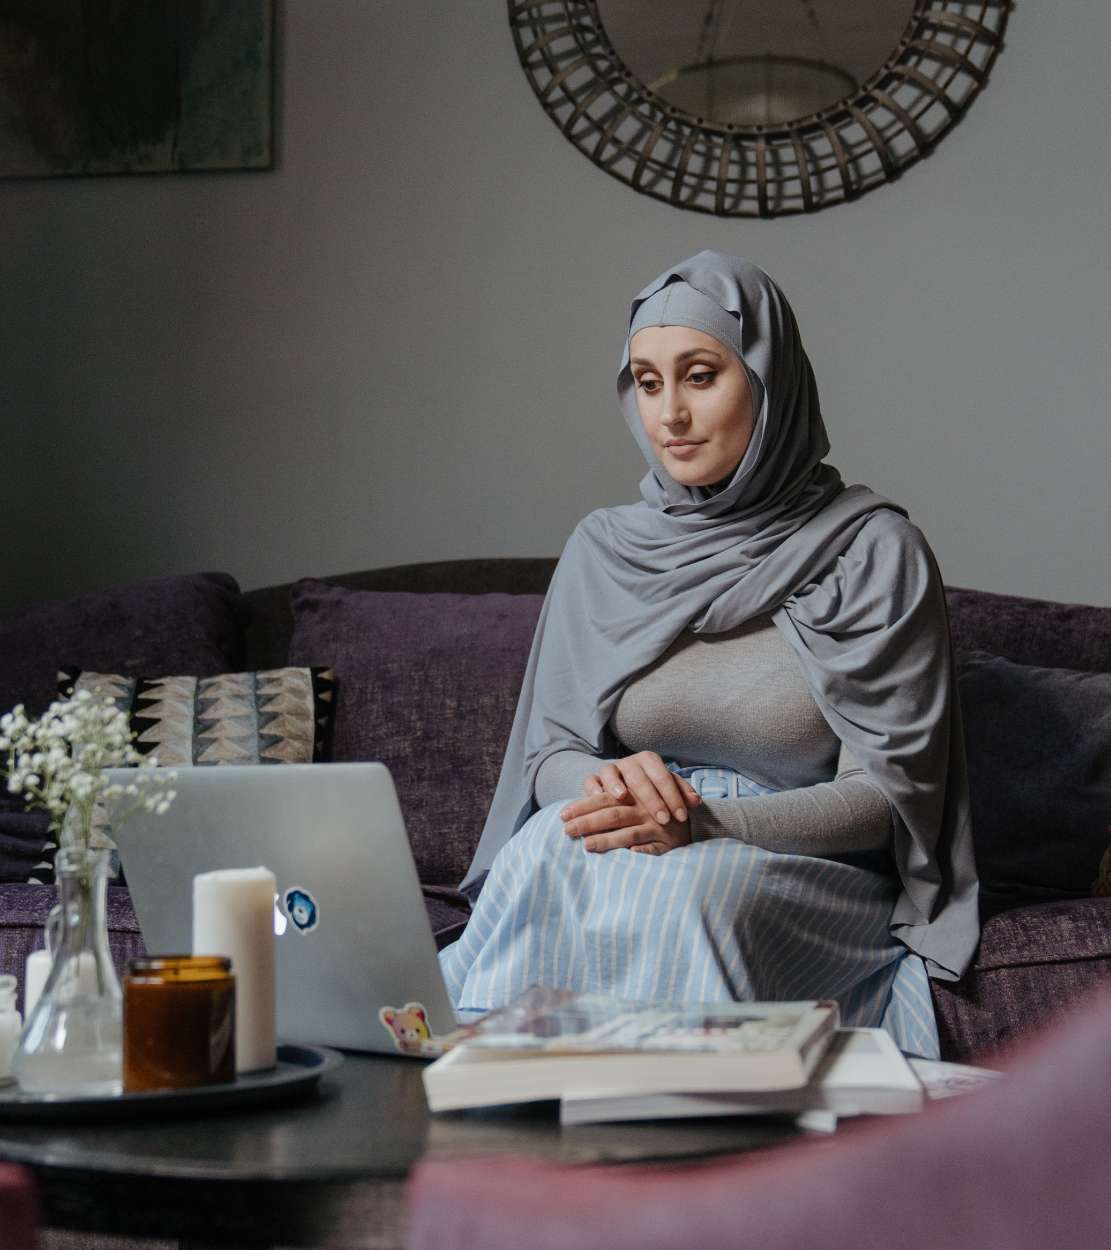 Woman with fair skin wearing a hijab sits on a couch and looks at an open laptop.